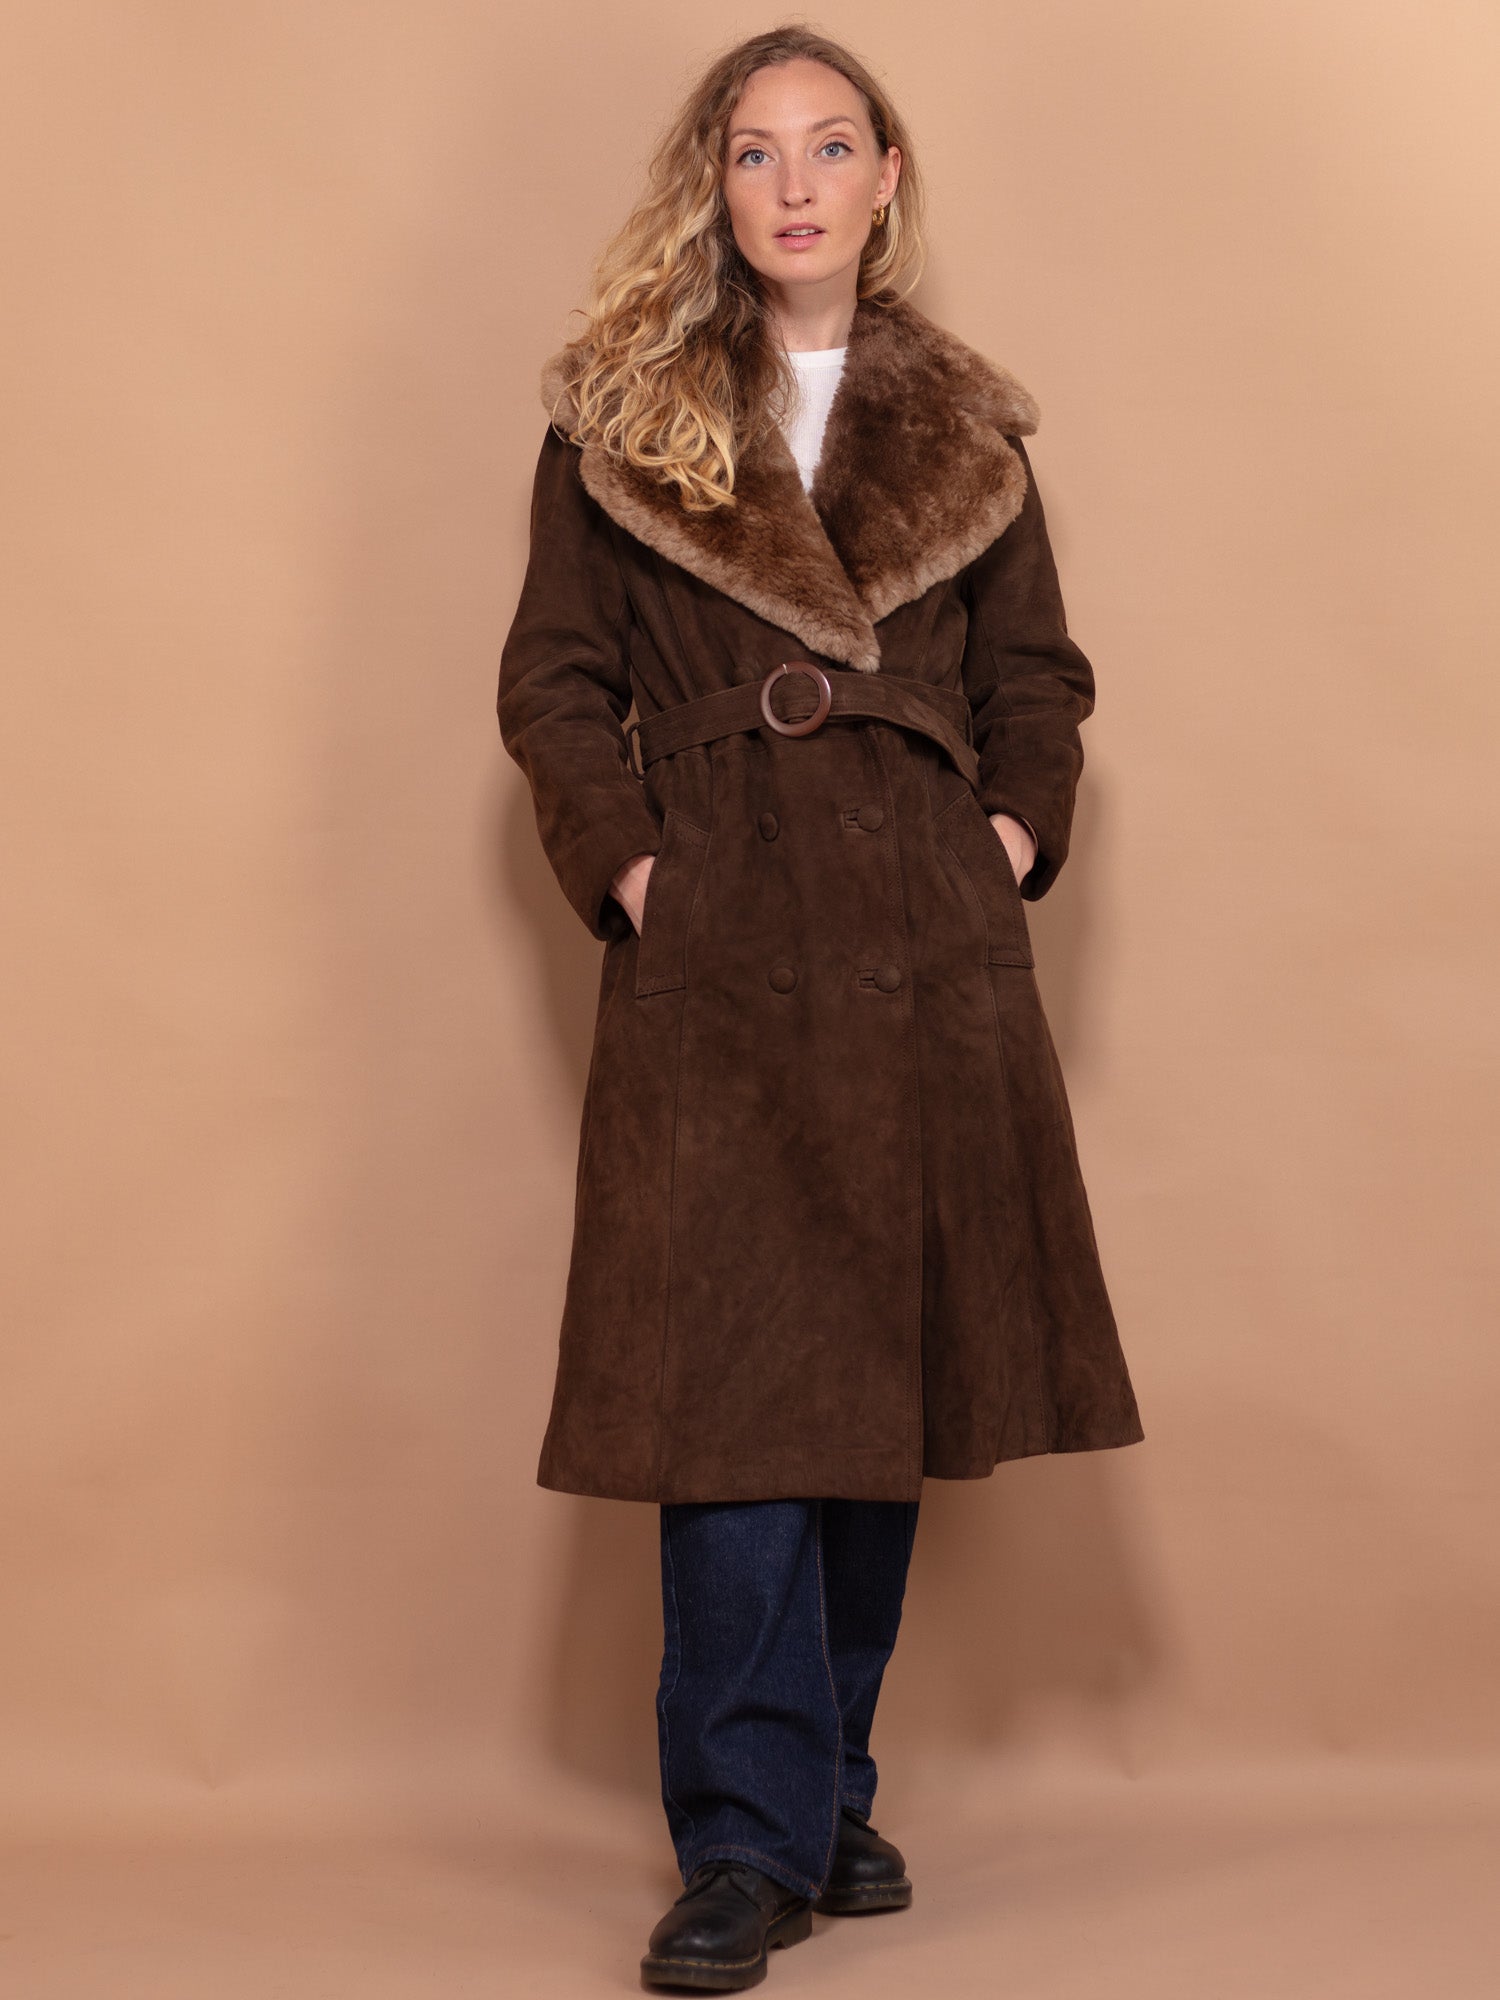 Online Vintage Store | 70's Women Suede Shearling Coat | Norther ...